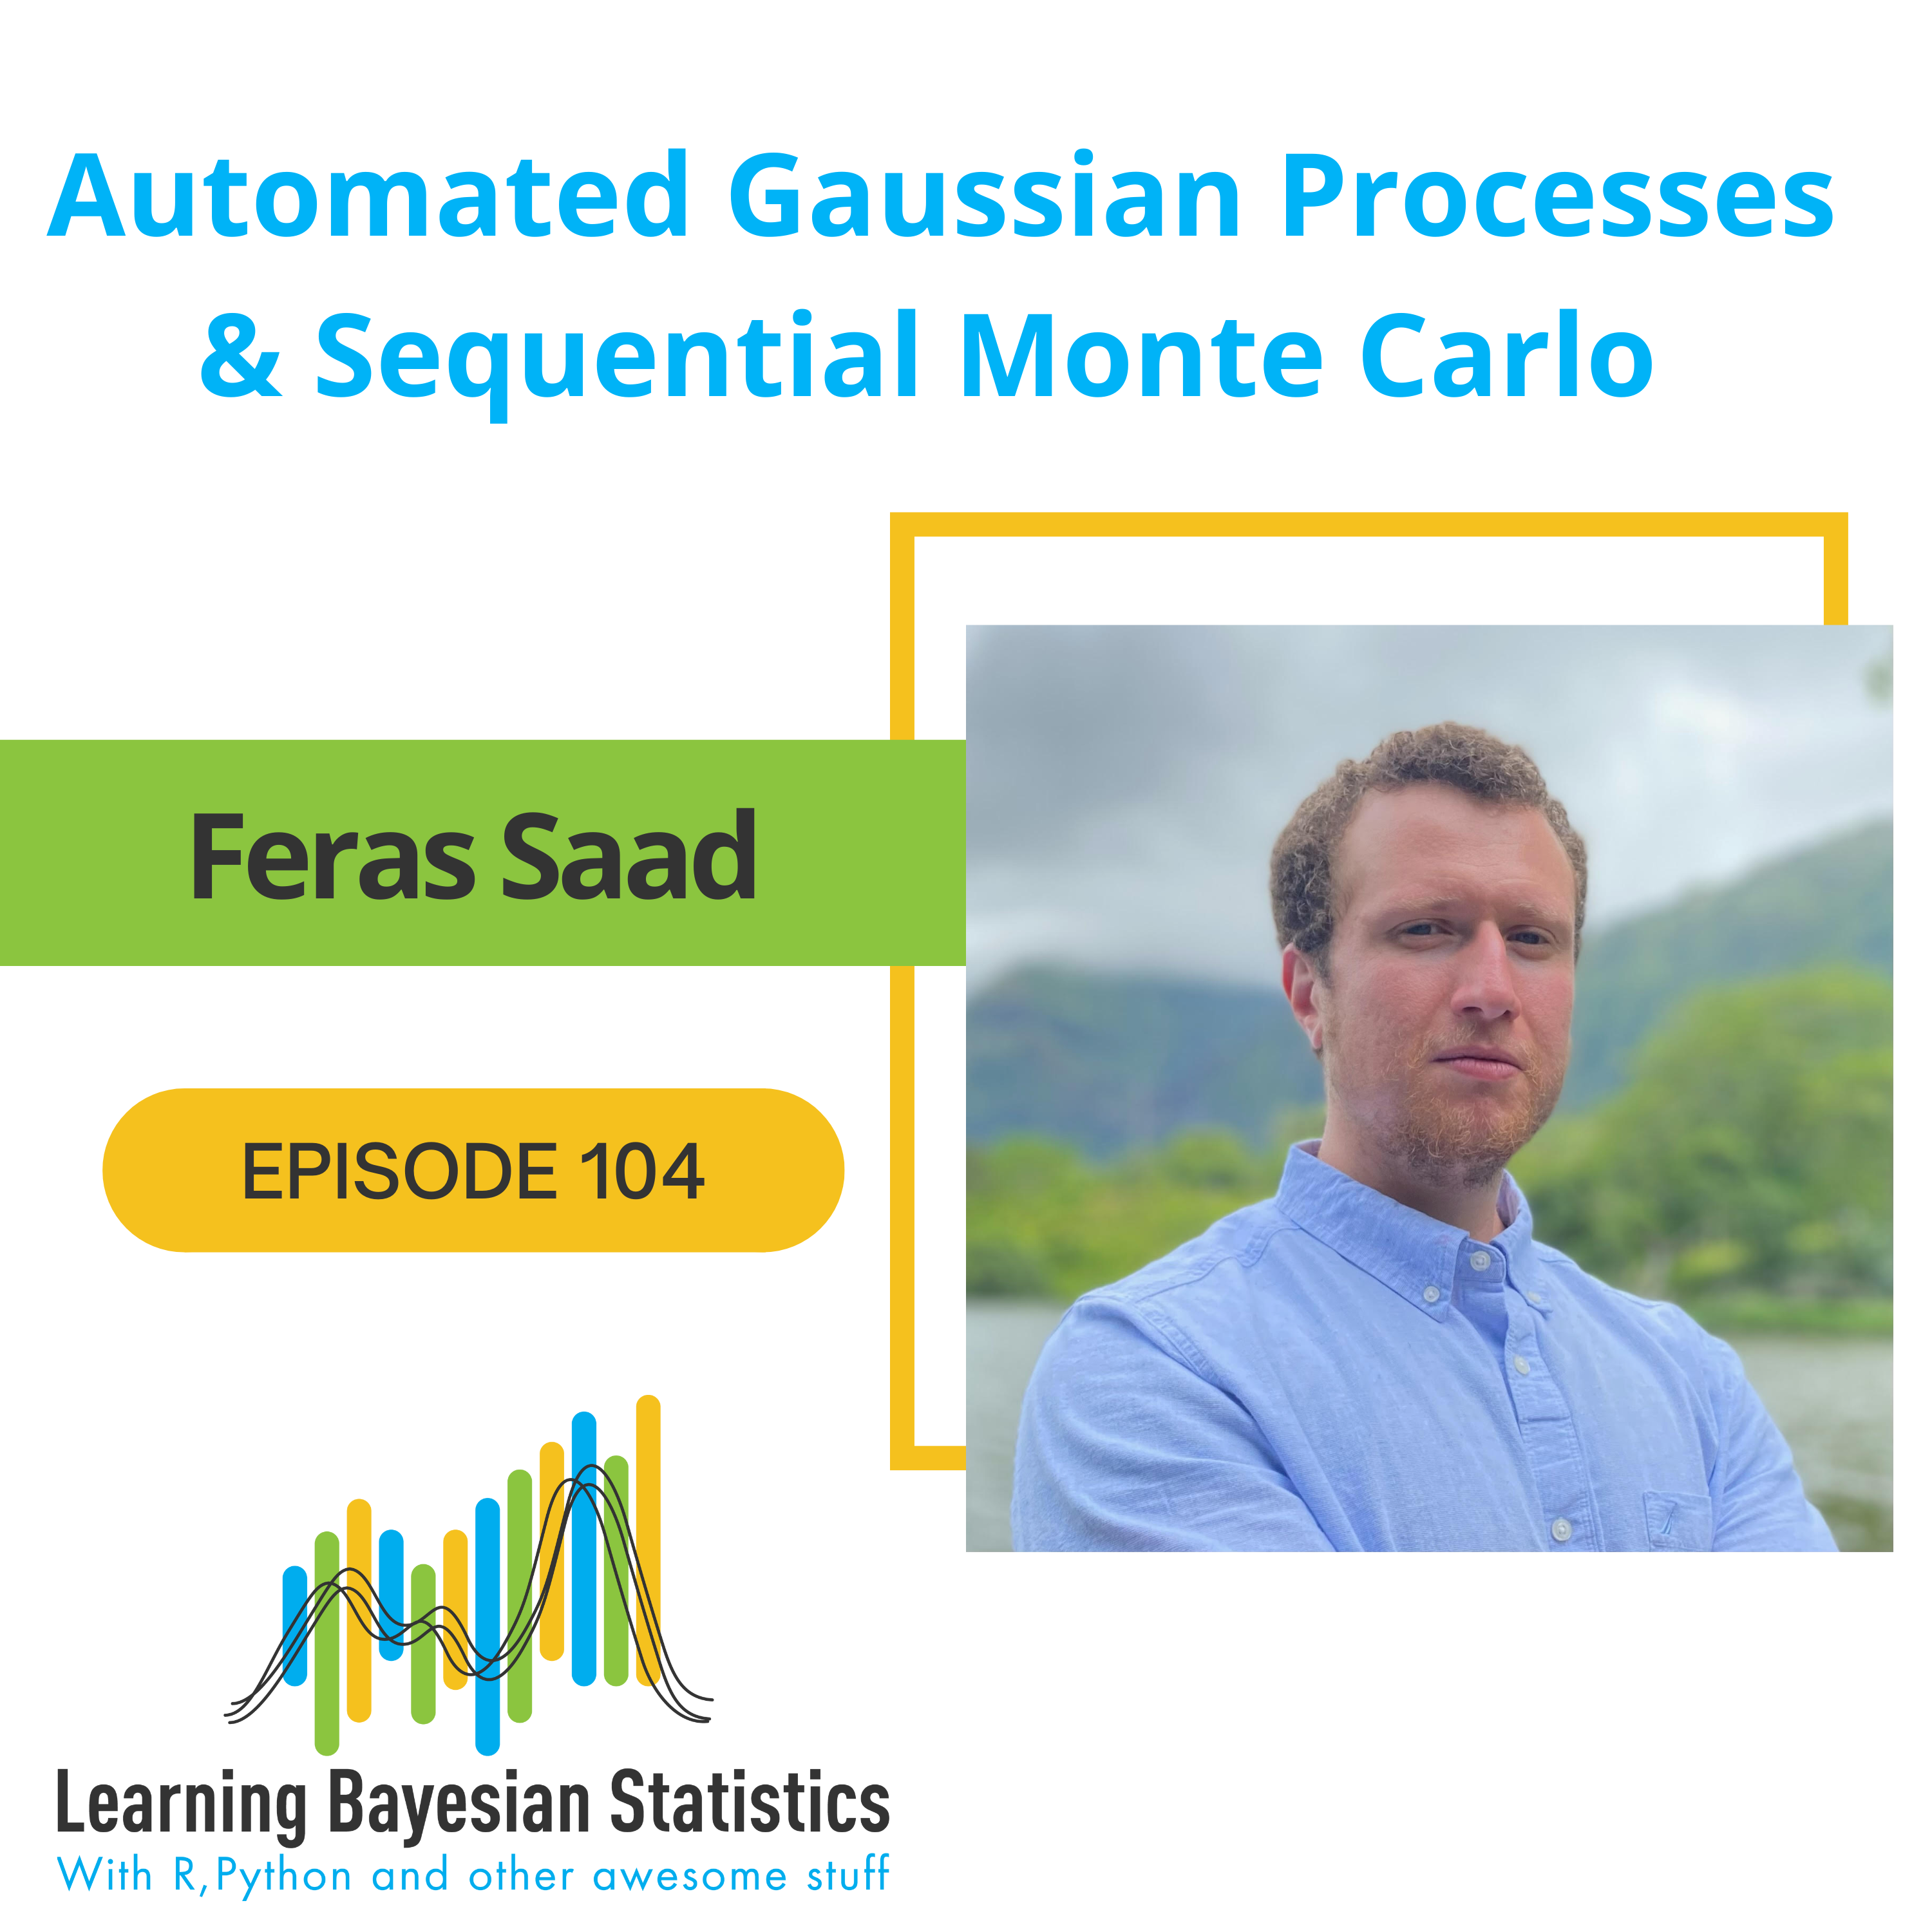 #104 Automated Gaussian Processes & Sequential Monte Carlo, with Feras Saad